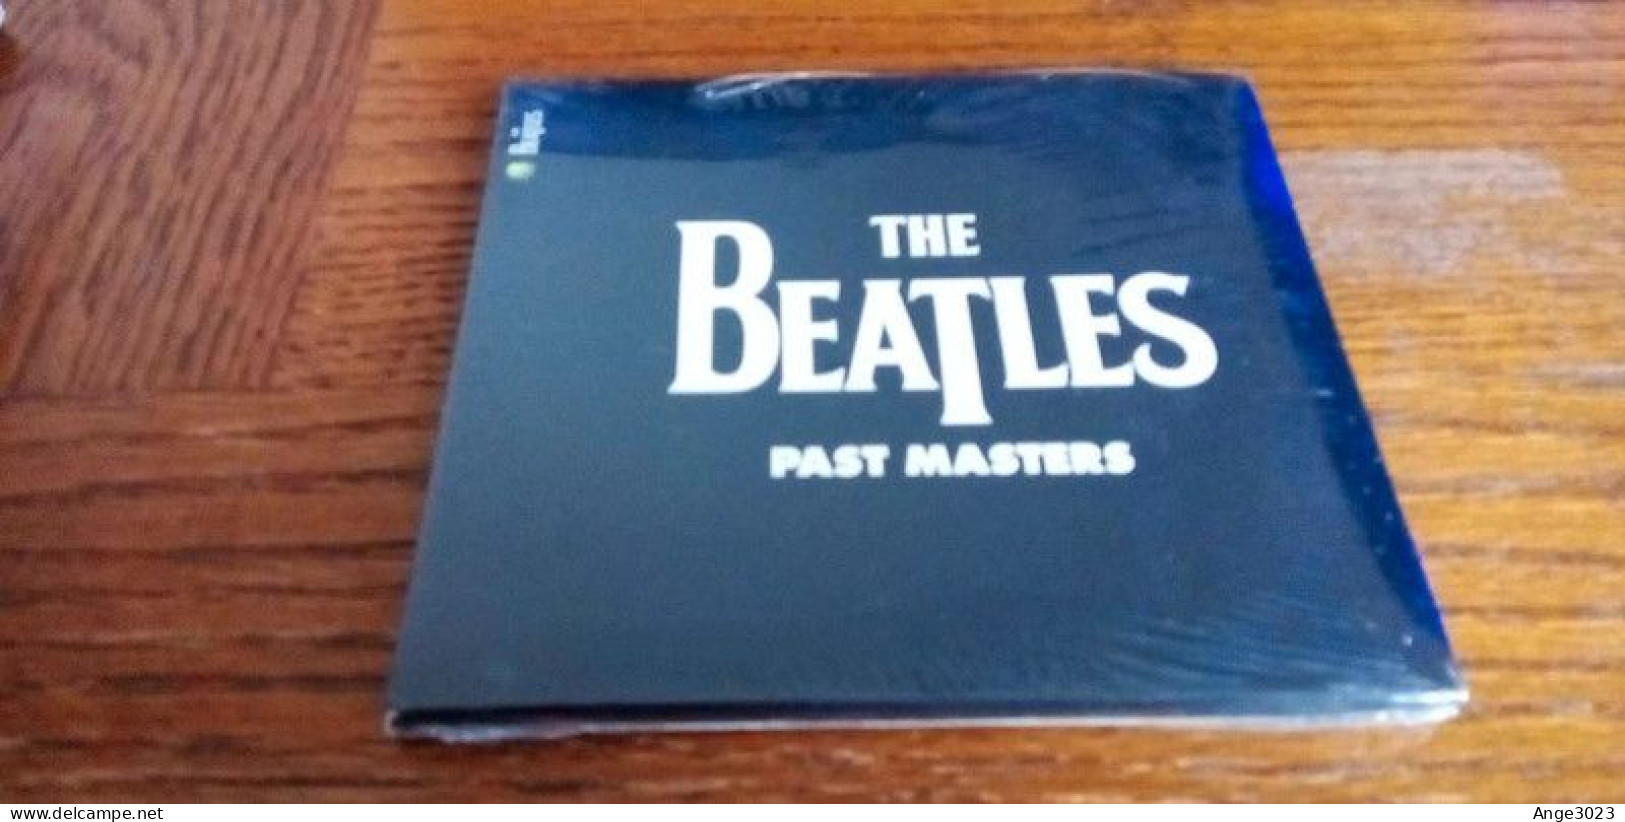 THE BEATLES "Past Master" - Rock